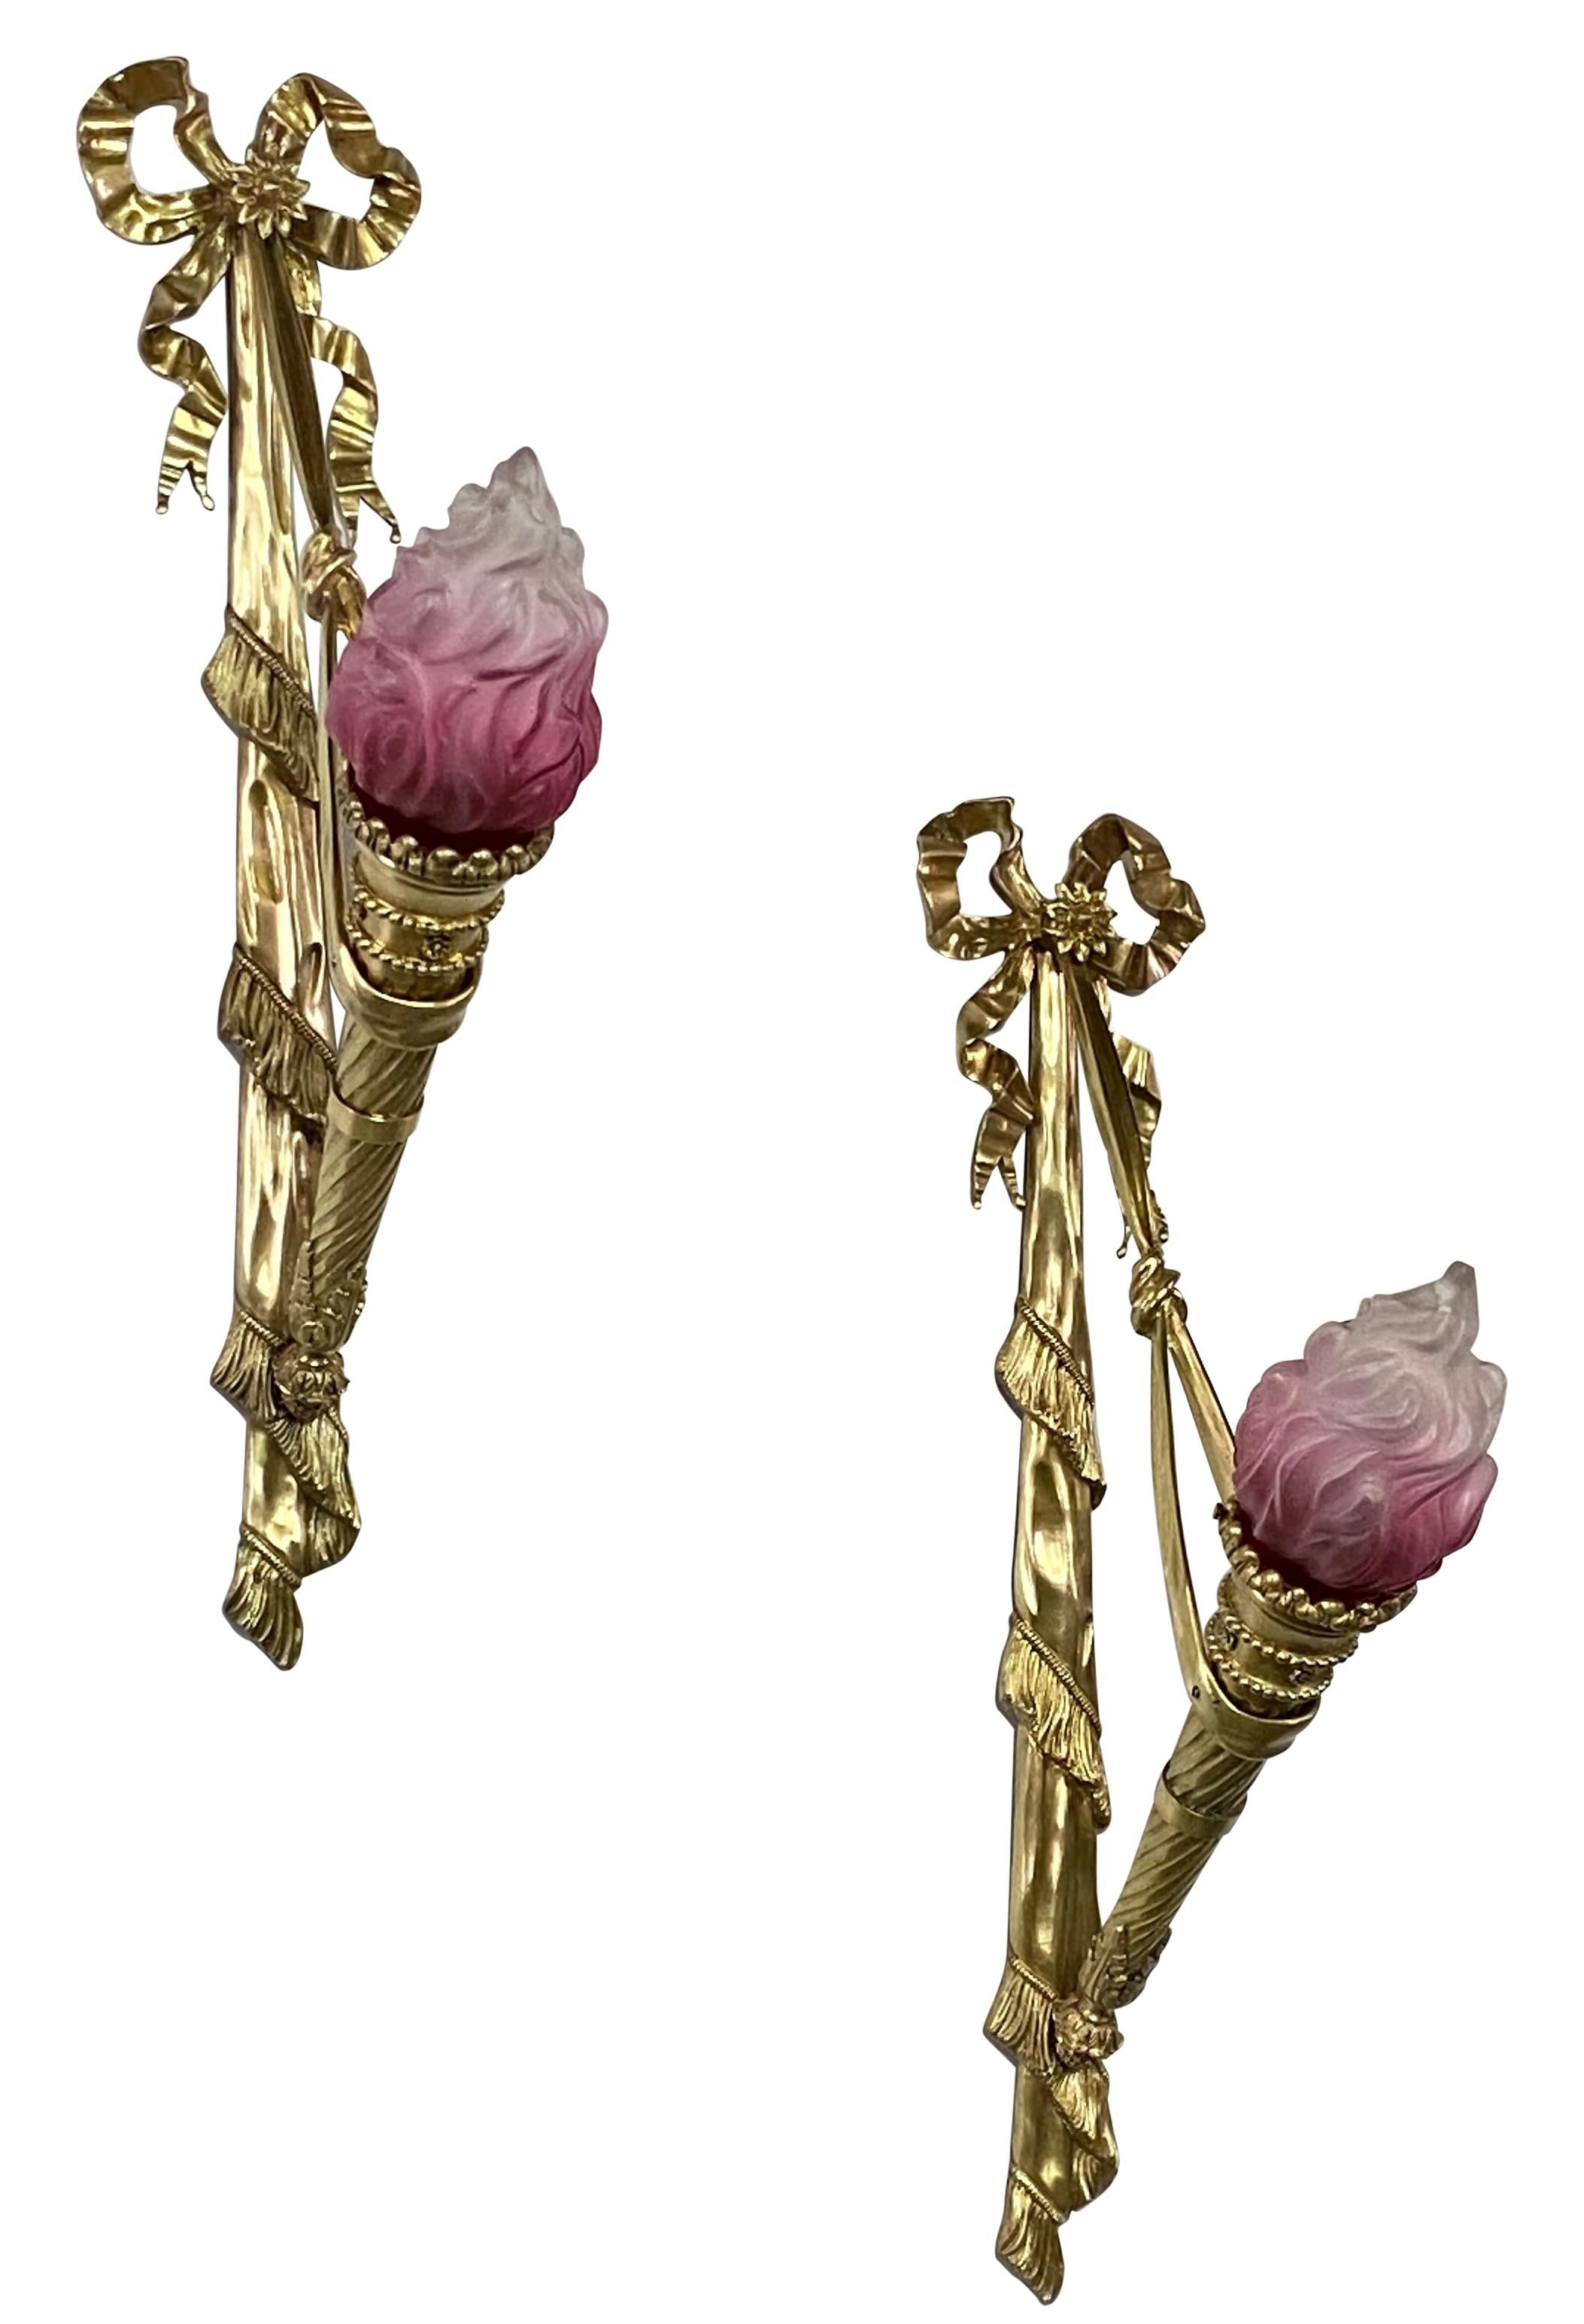 A large pair of Beaux Arts period solid brass torch style wall sconces with original frosted and cranberry color flame glass shades.
France, circa 1900, early 20th century.
Recently refurbished and rewired. In excellent antique condition.
For